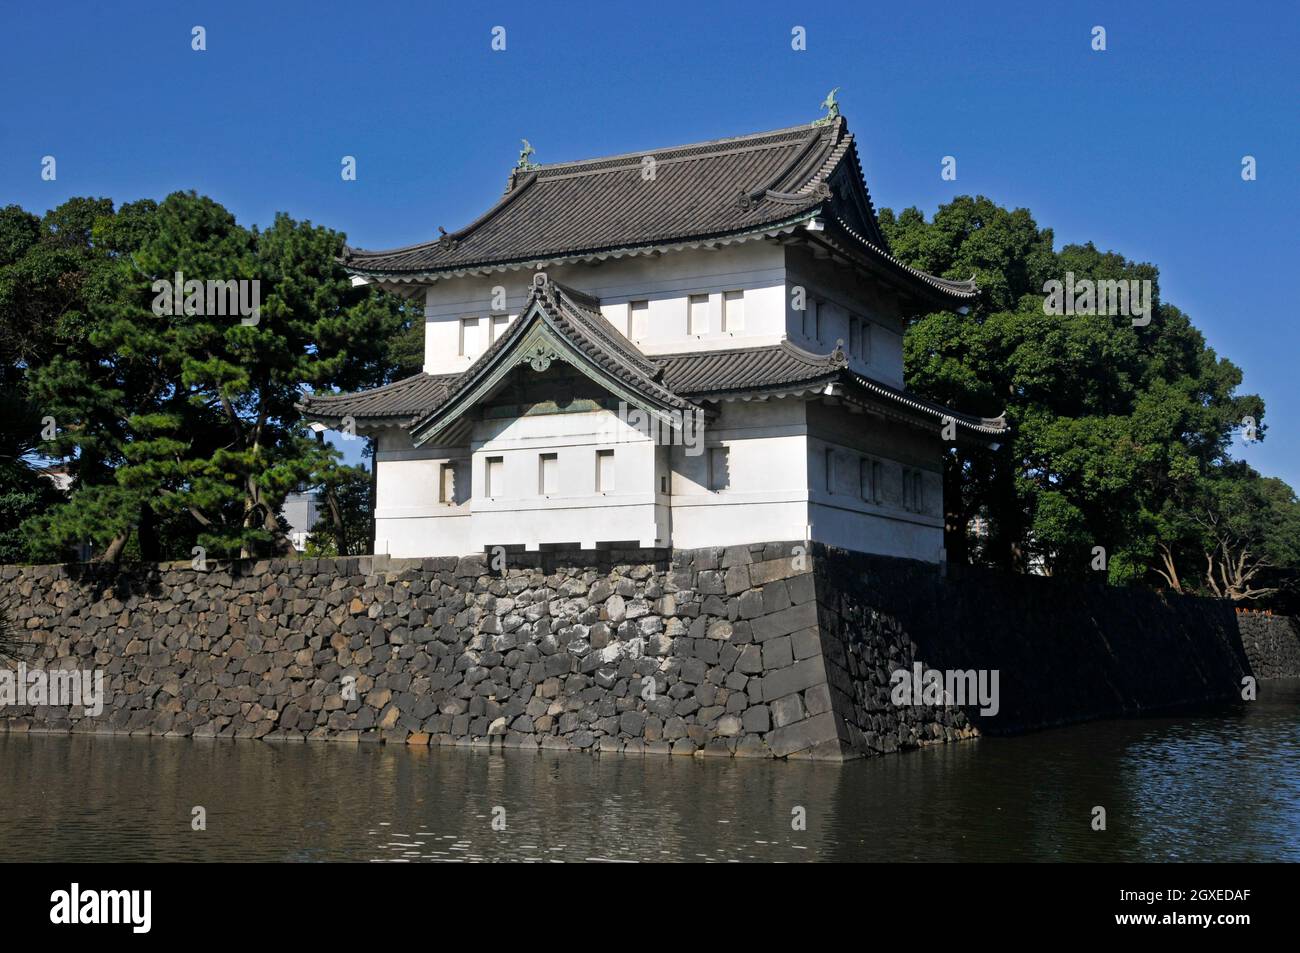 Traditional Japanese architecture at the Imperial Palace grounds surrounded by a moat, Tokyo, Japan Stock Photo